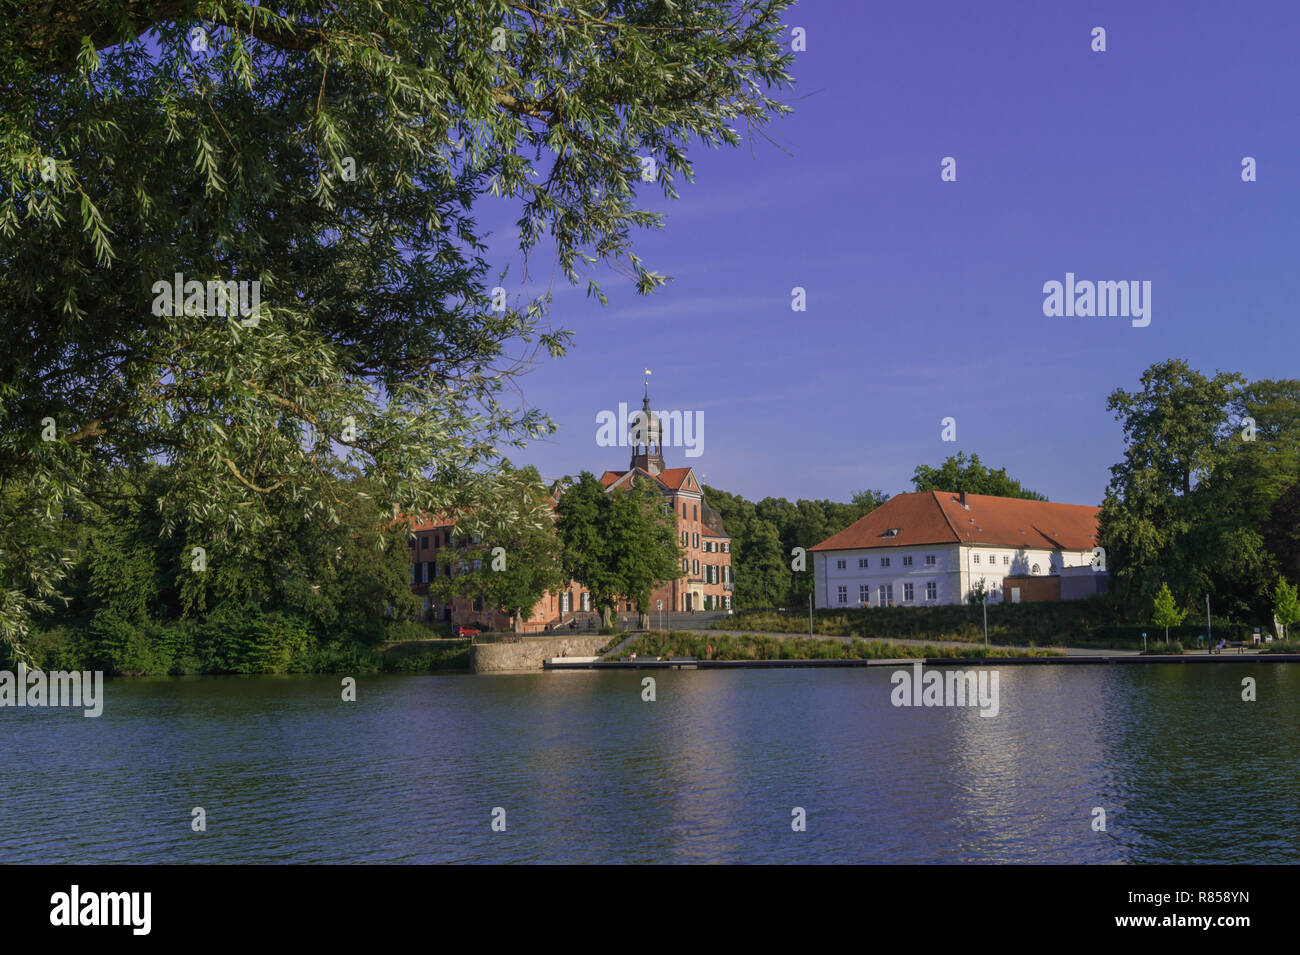 Eutin, Germany - July 17, 2018: Beautiful view over the lake on the castle of eutin. Stock Photo